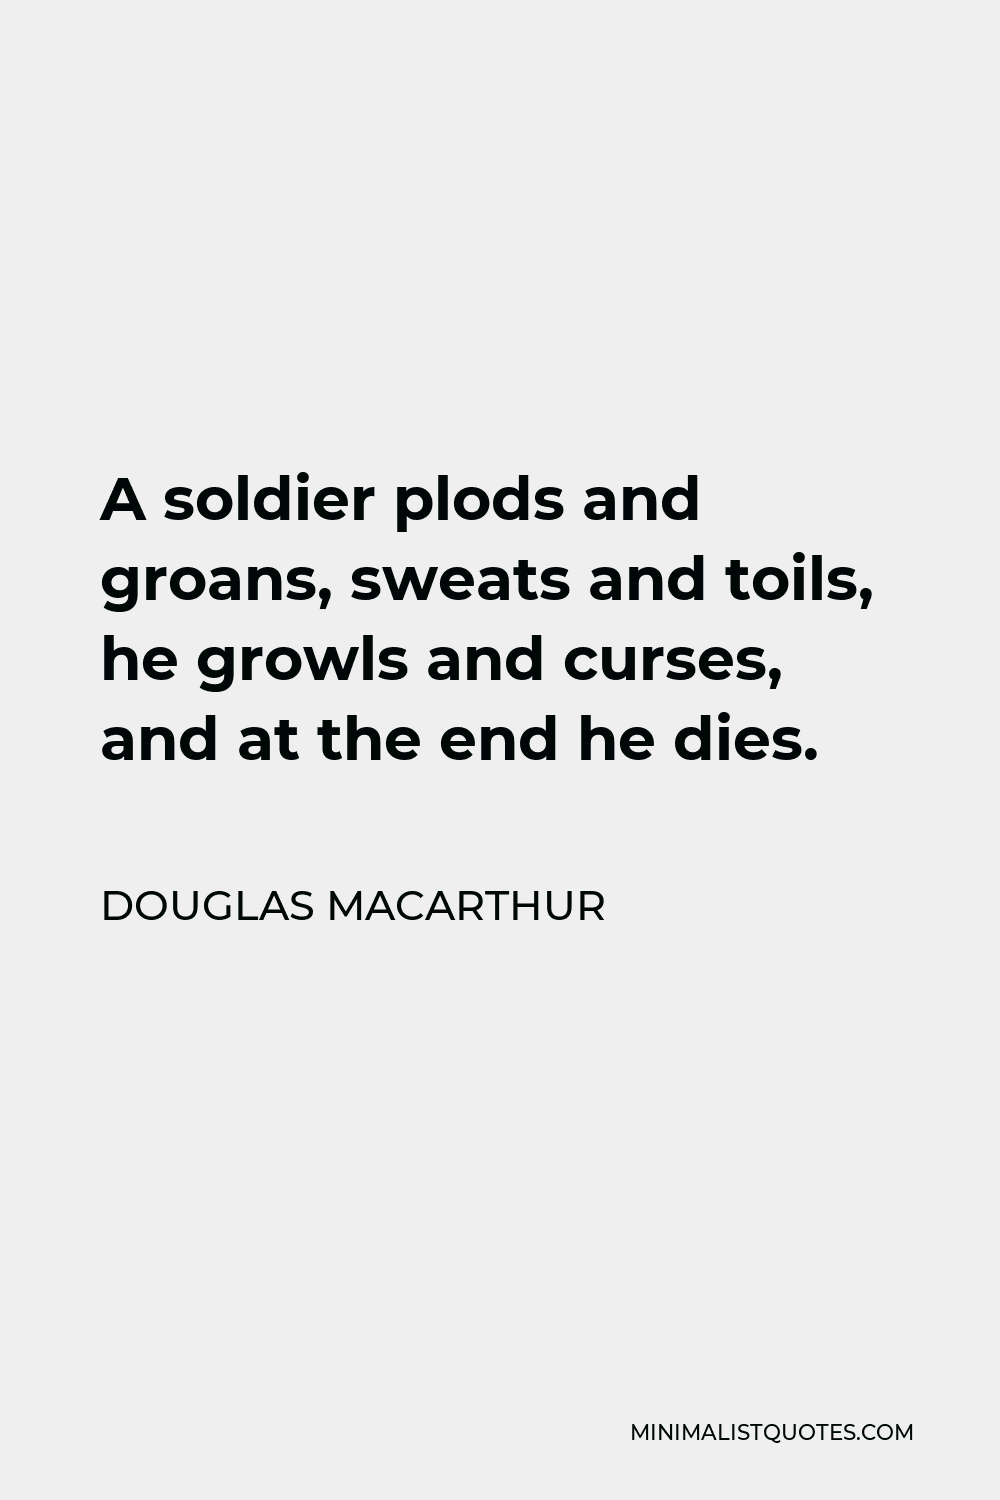 Douglas MacArthur Quote - A soldier plods and groans, sweats and toils, he growls and curses, and at the end he dies.